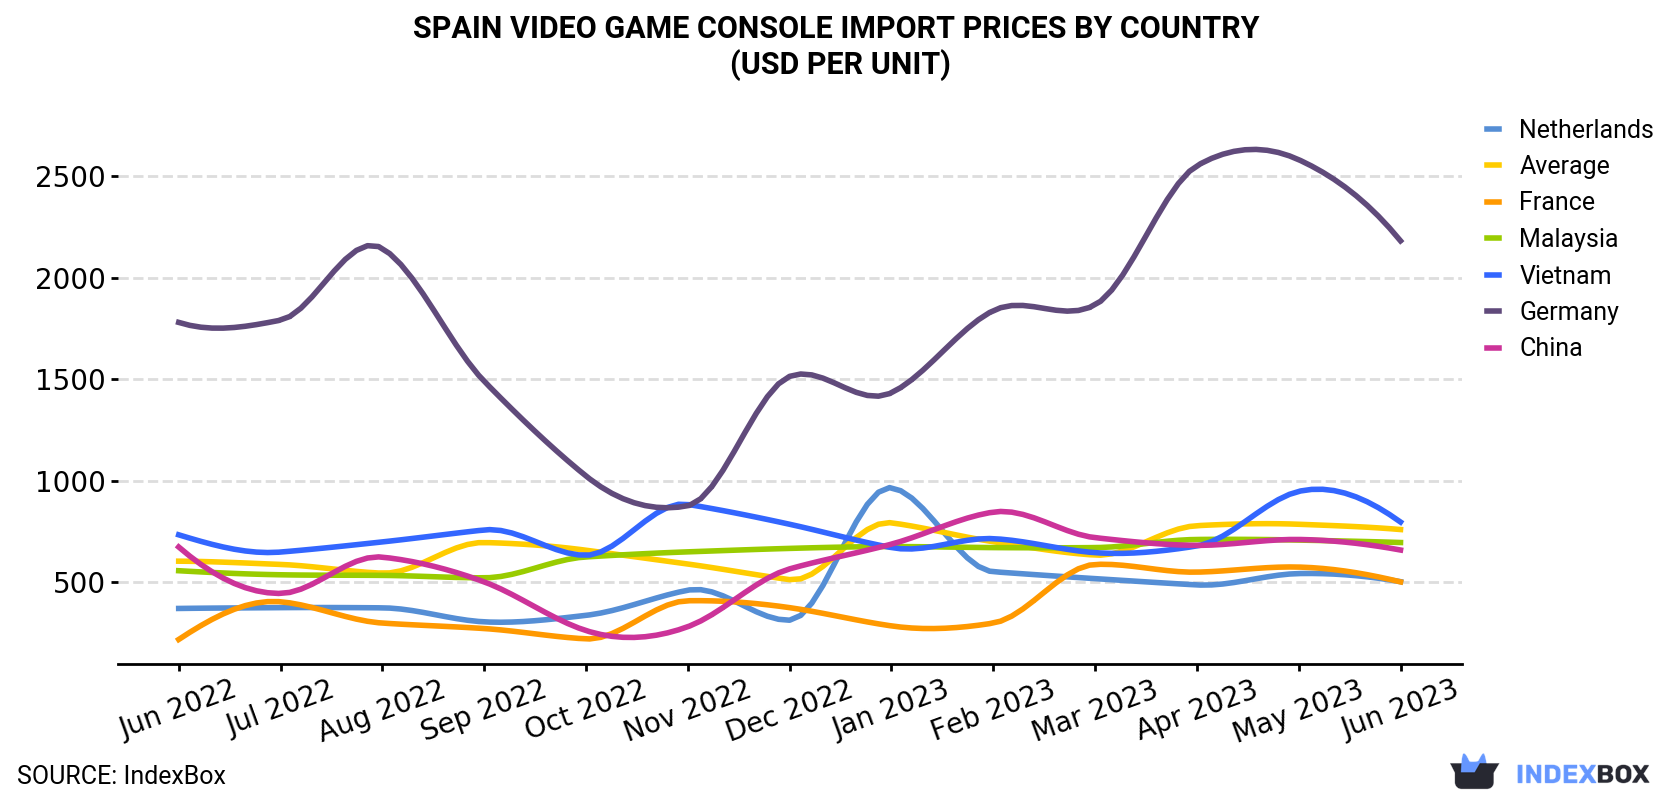 Spain Video Game Console Import Prices By Country (USD Per Unit)